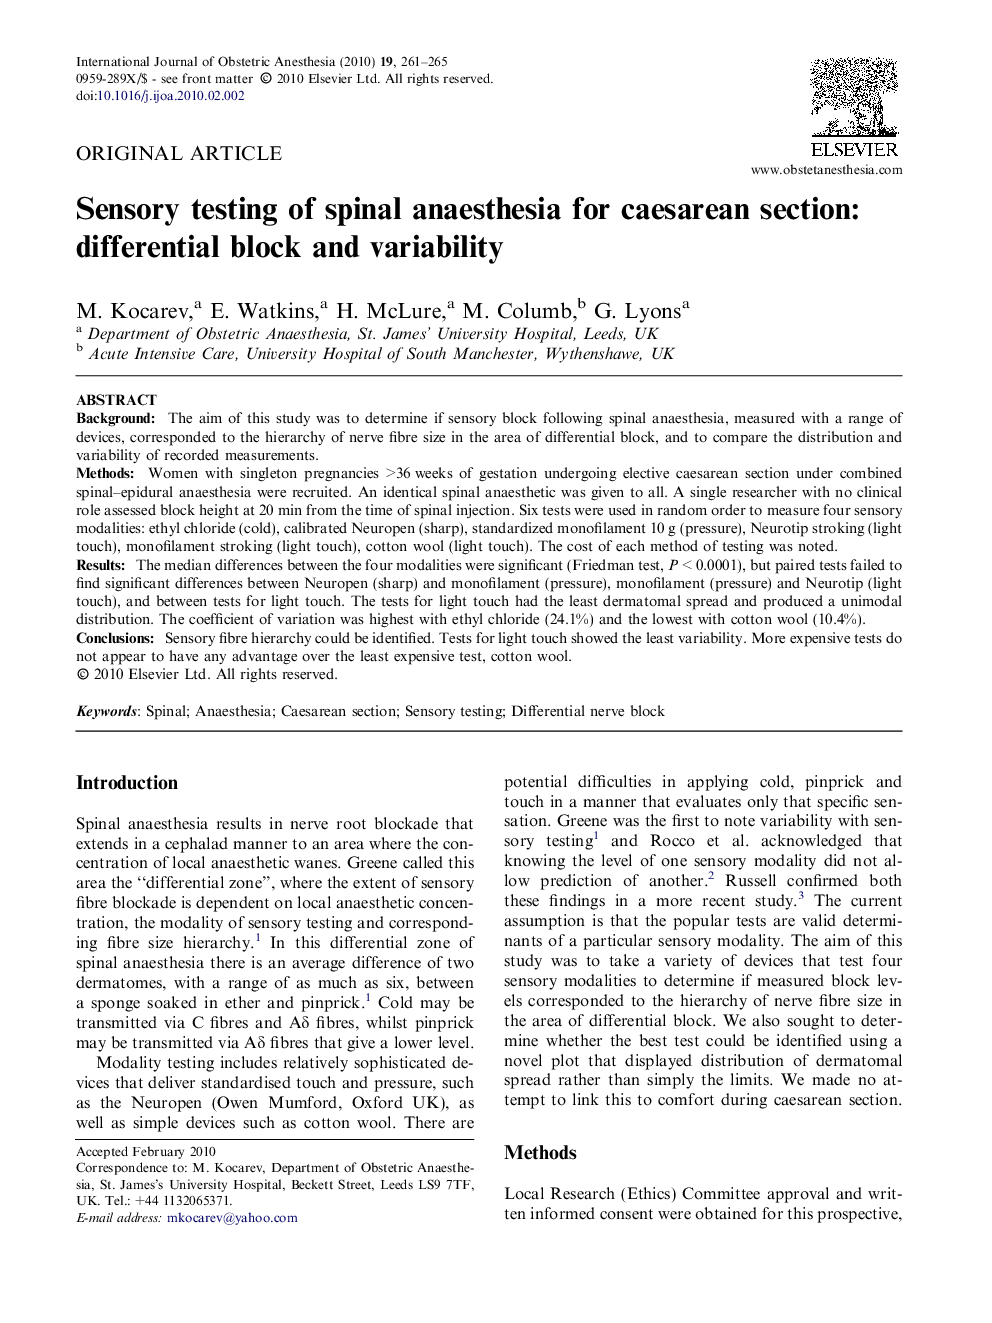 Sensory testing of spinal anaesthesia for caesarean section: differential block and variability